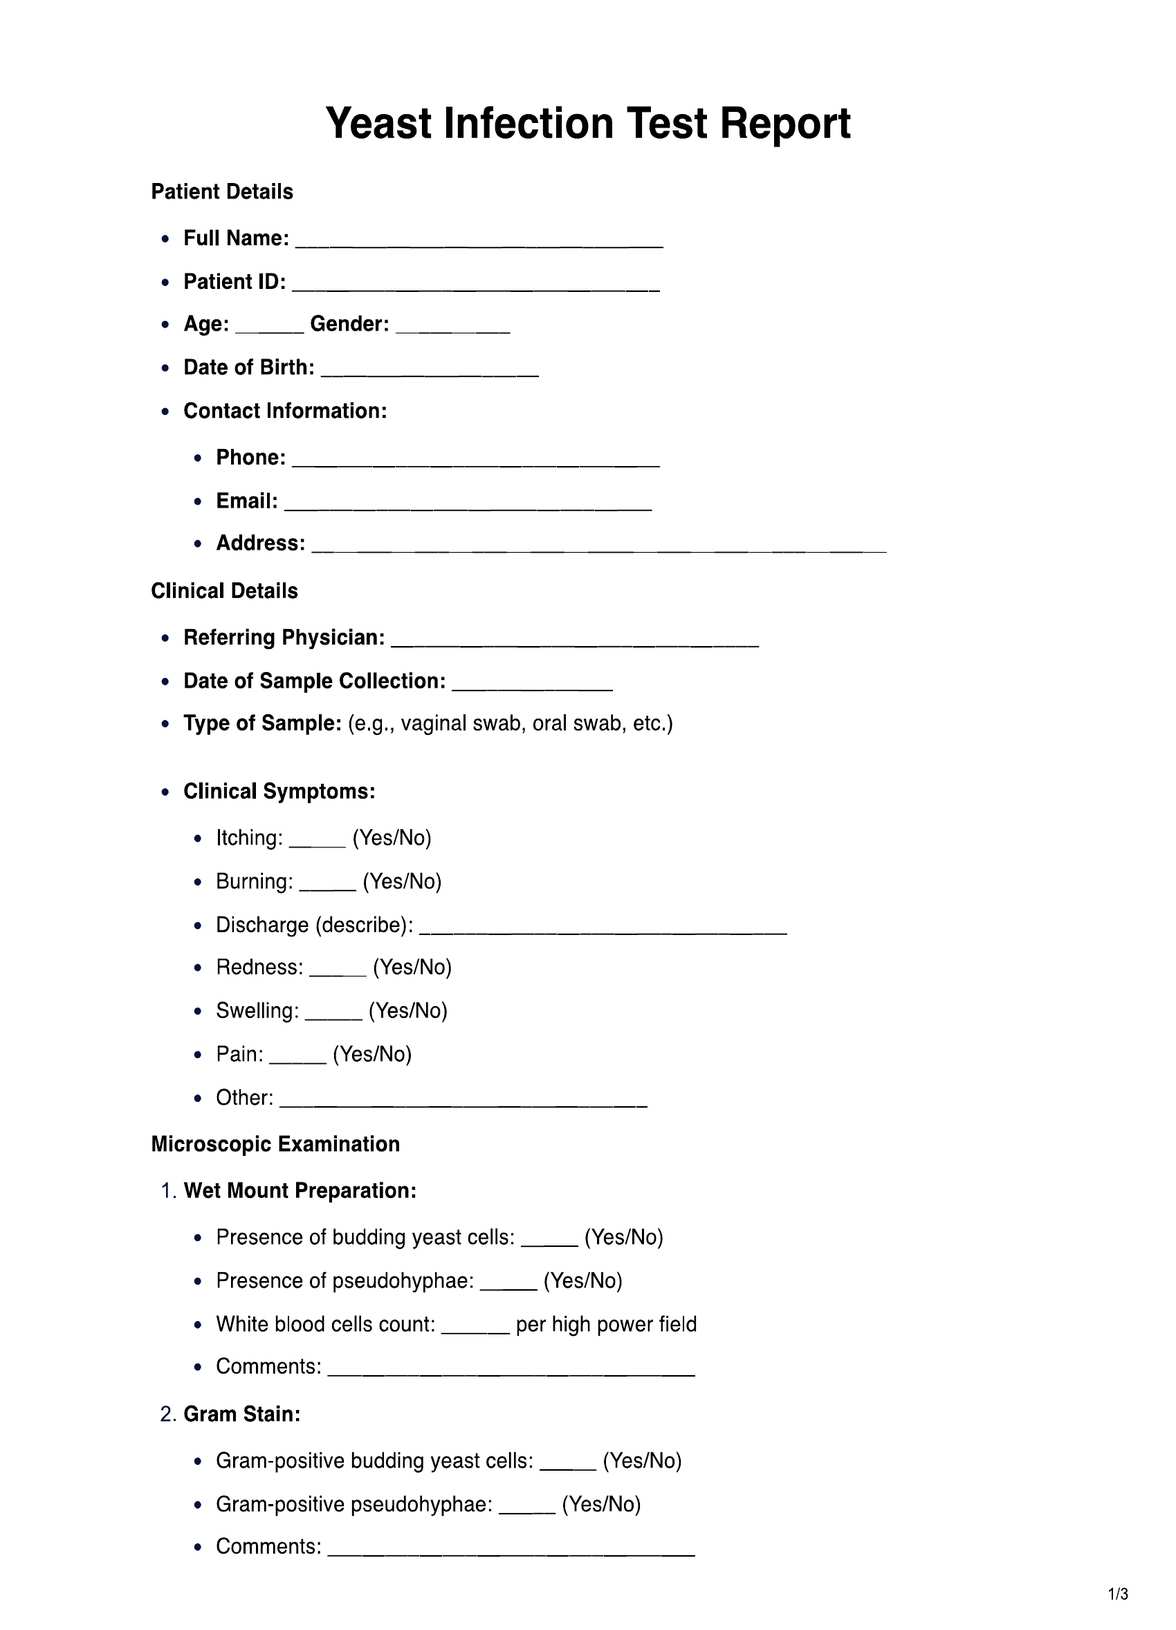 Yeast Infection PDF Example